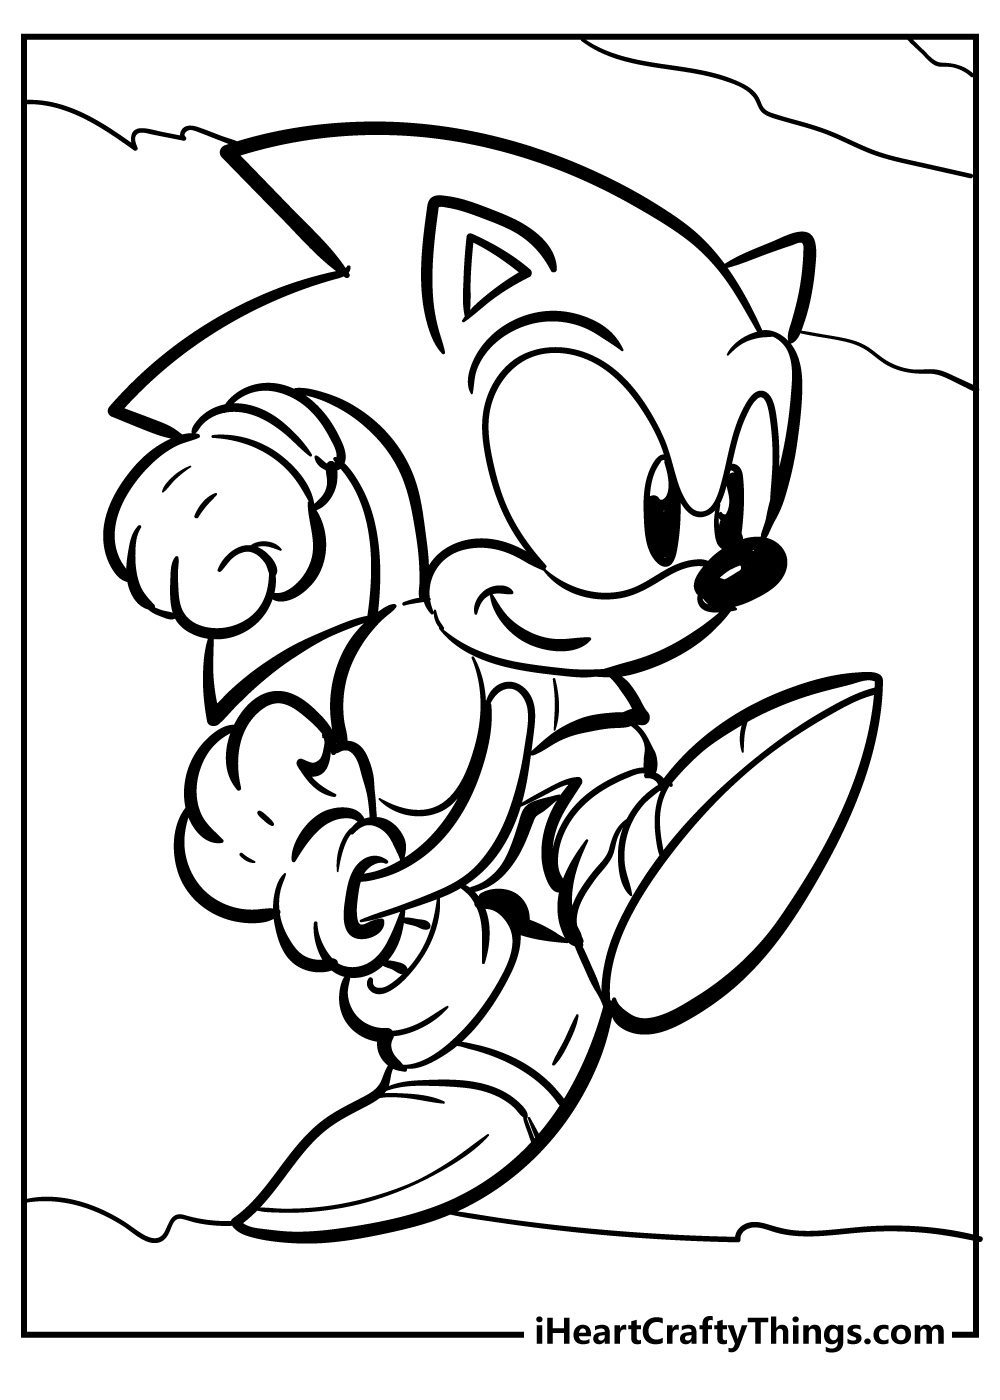 the hedgehog coloring pages free printable